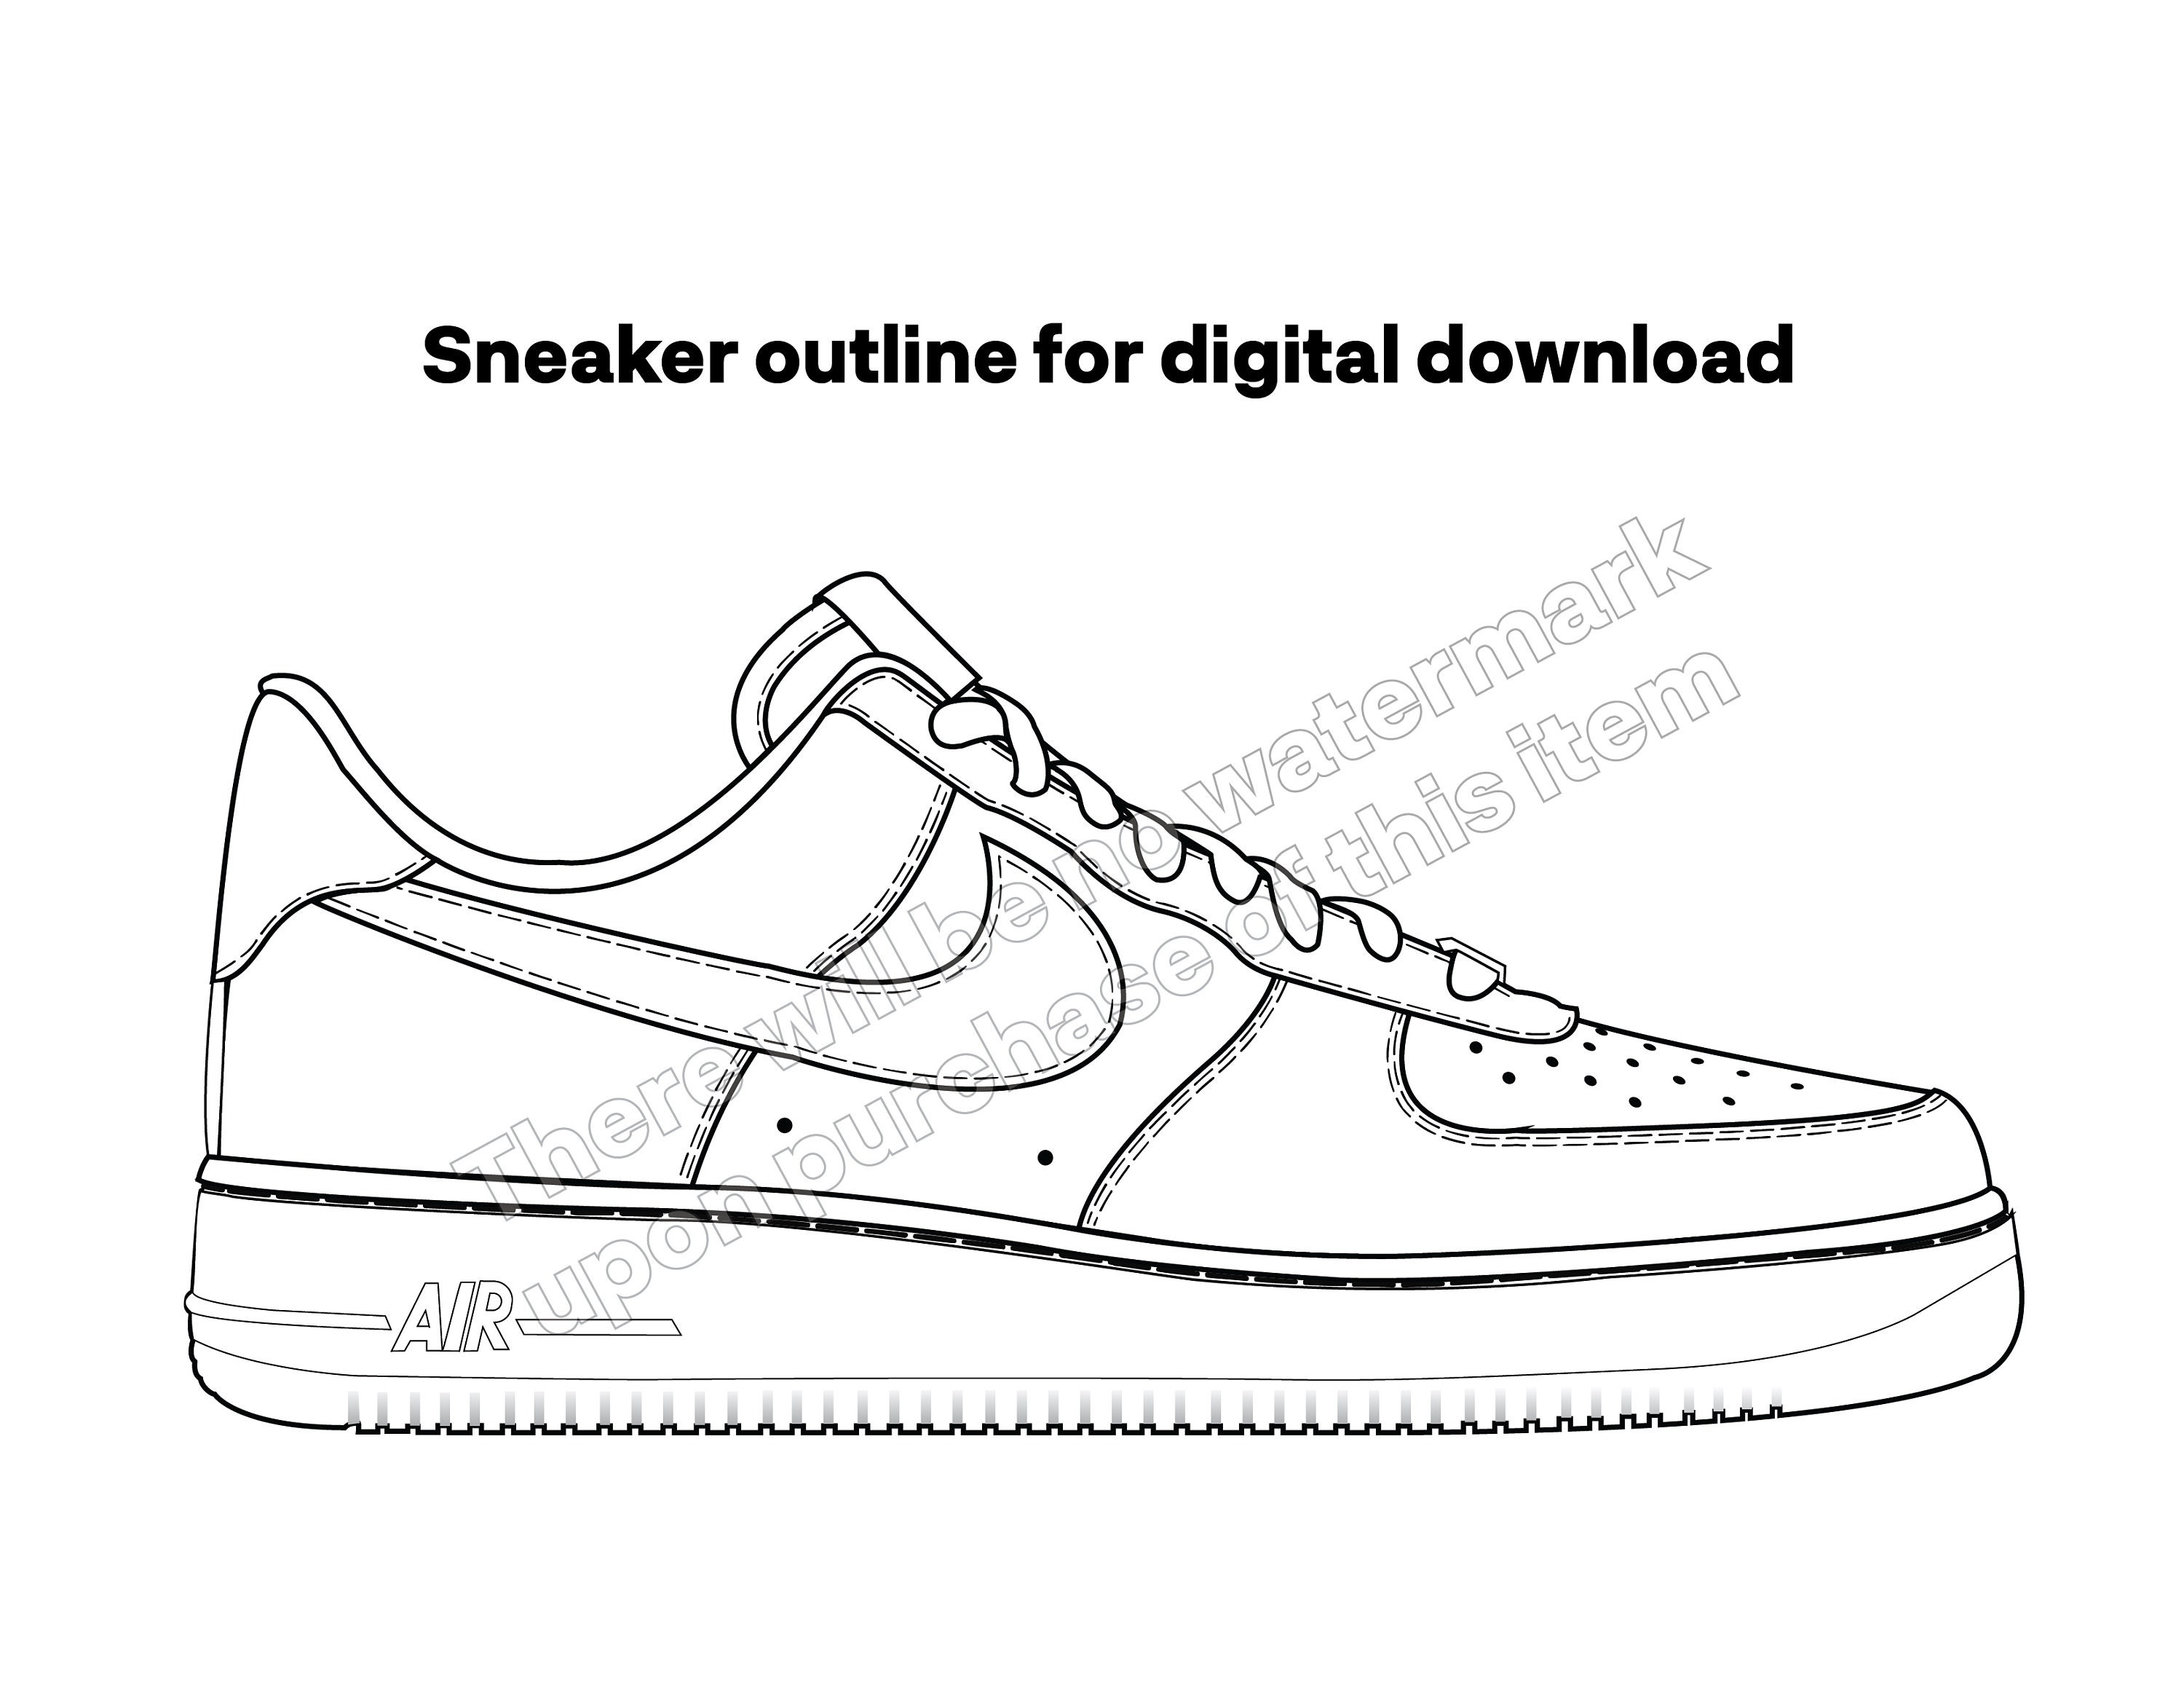 OFF WHITE AIR TEXT FOR AJ1 AF1 VINYL STENCIL FOR CUSTOM SHOES AND SMALL  PROJECTS